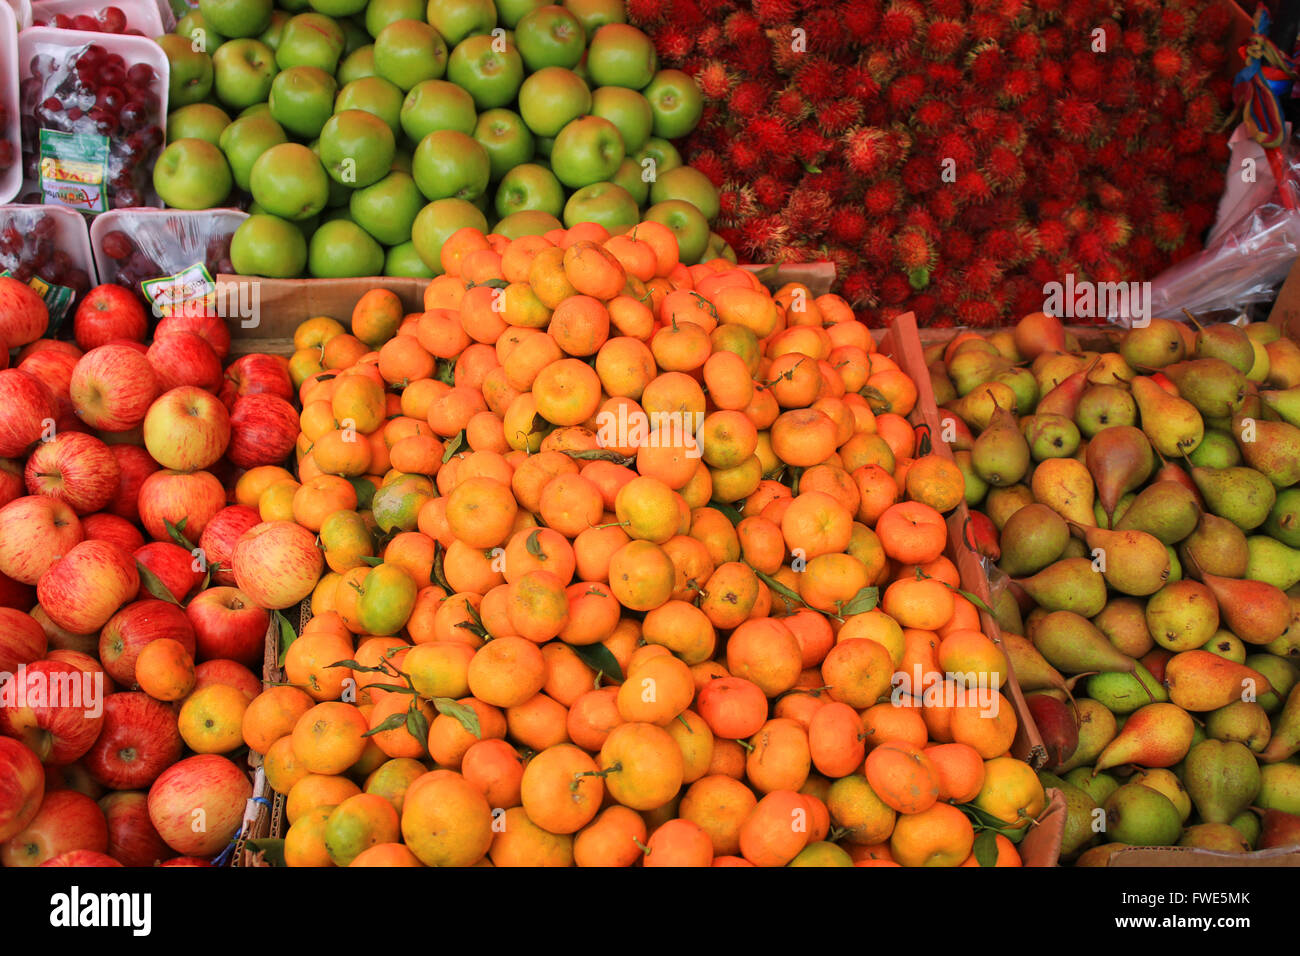 Fresh apples, rambutan, pears and oranges for sale at the outdoor food market in Otavalo, Ecuador Stock Photo